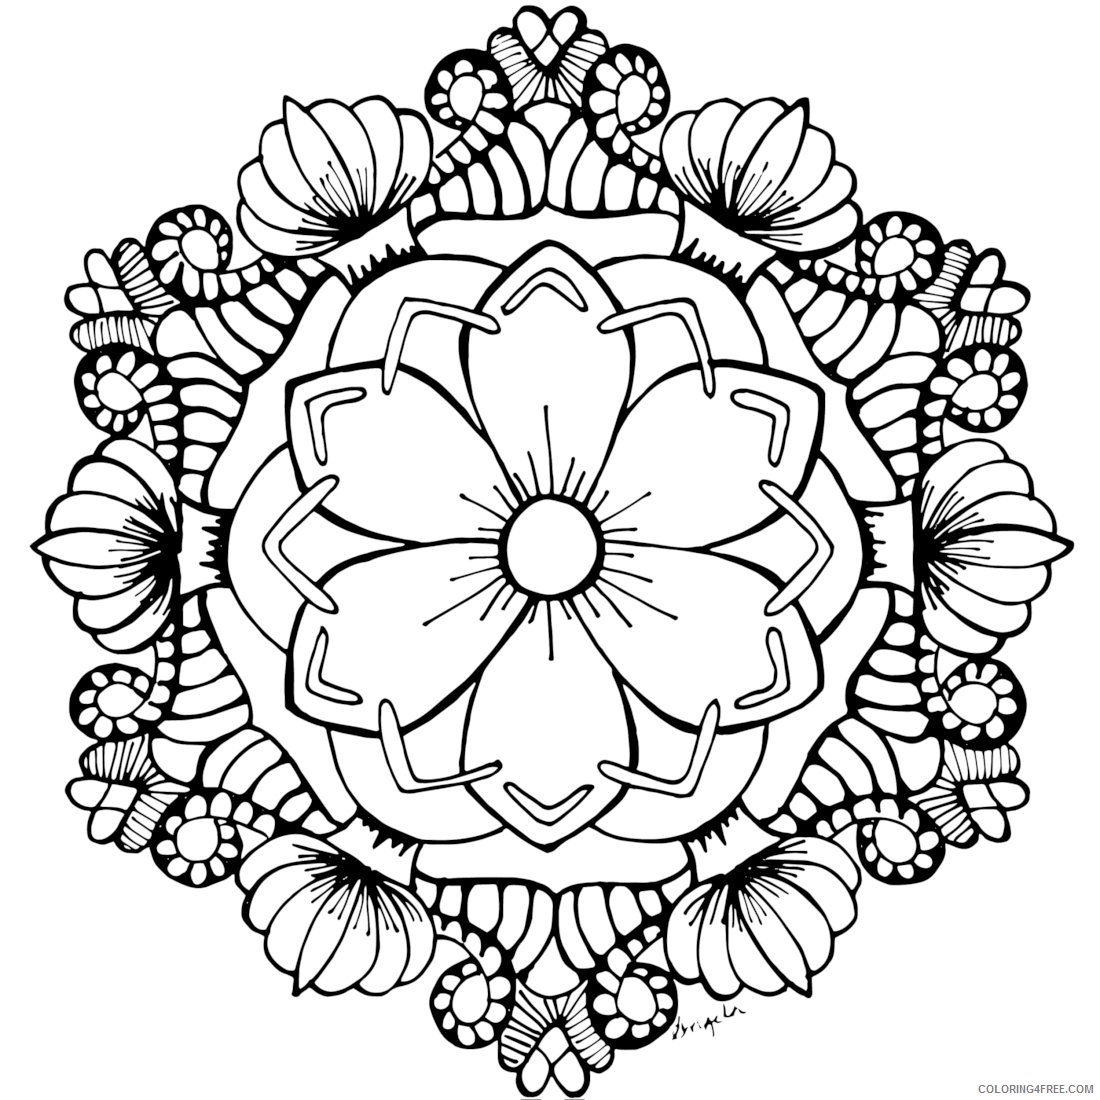 80s Coloring Pages Printable Sheets Pics For Adults – 2021 09 864 Coloring4free